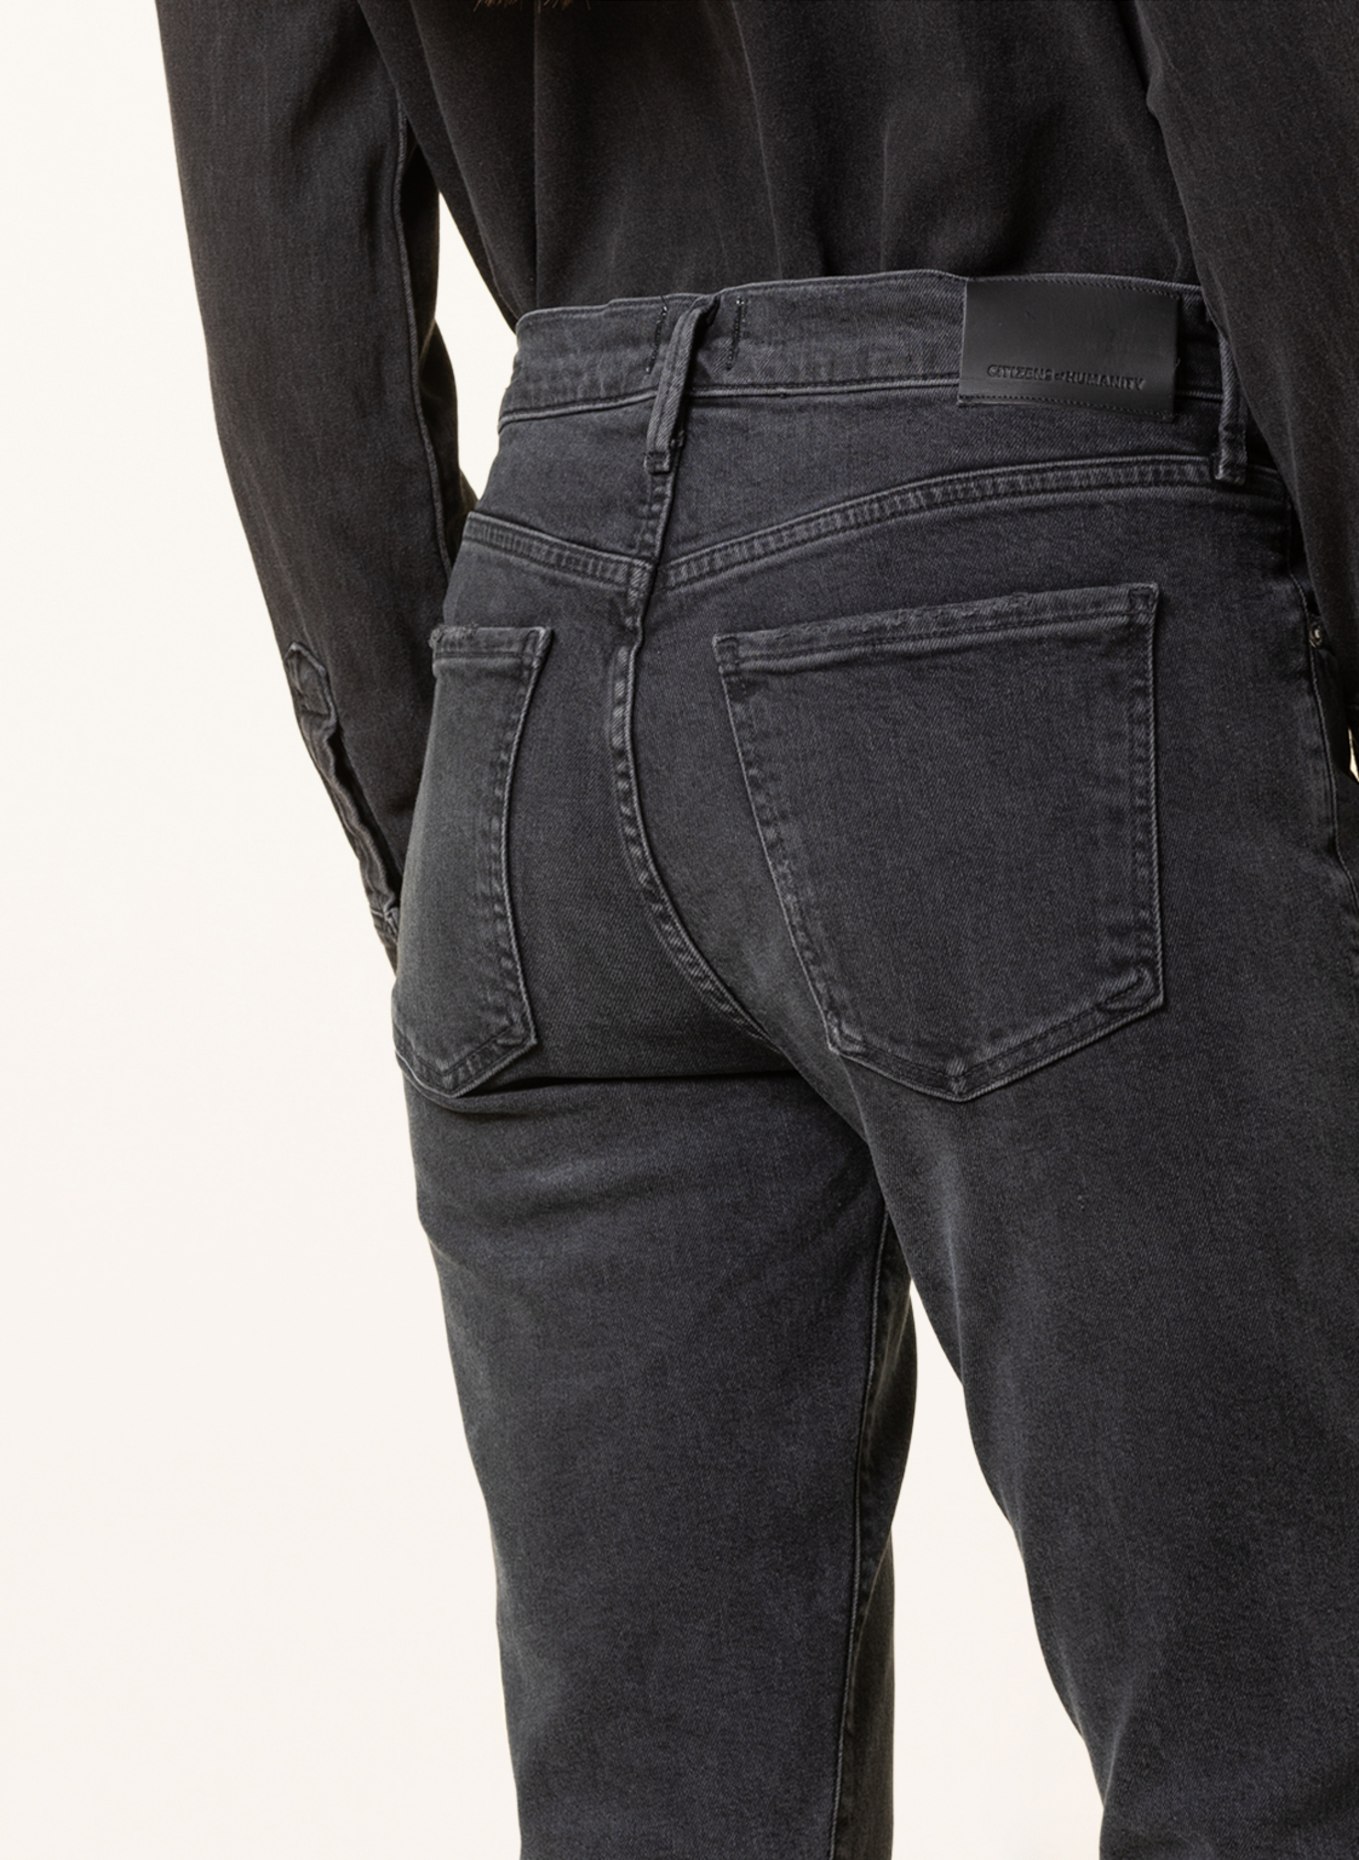 Citizens of Humanity  Premium Denim Jeans  The Ultimate Jean Shop Online